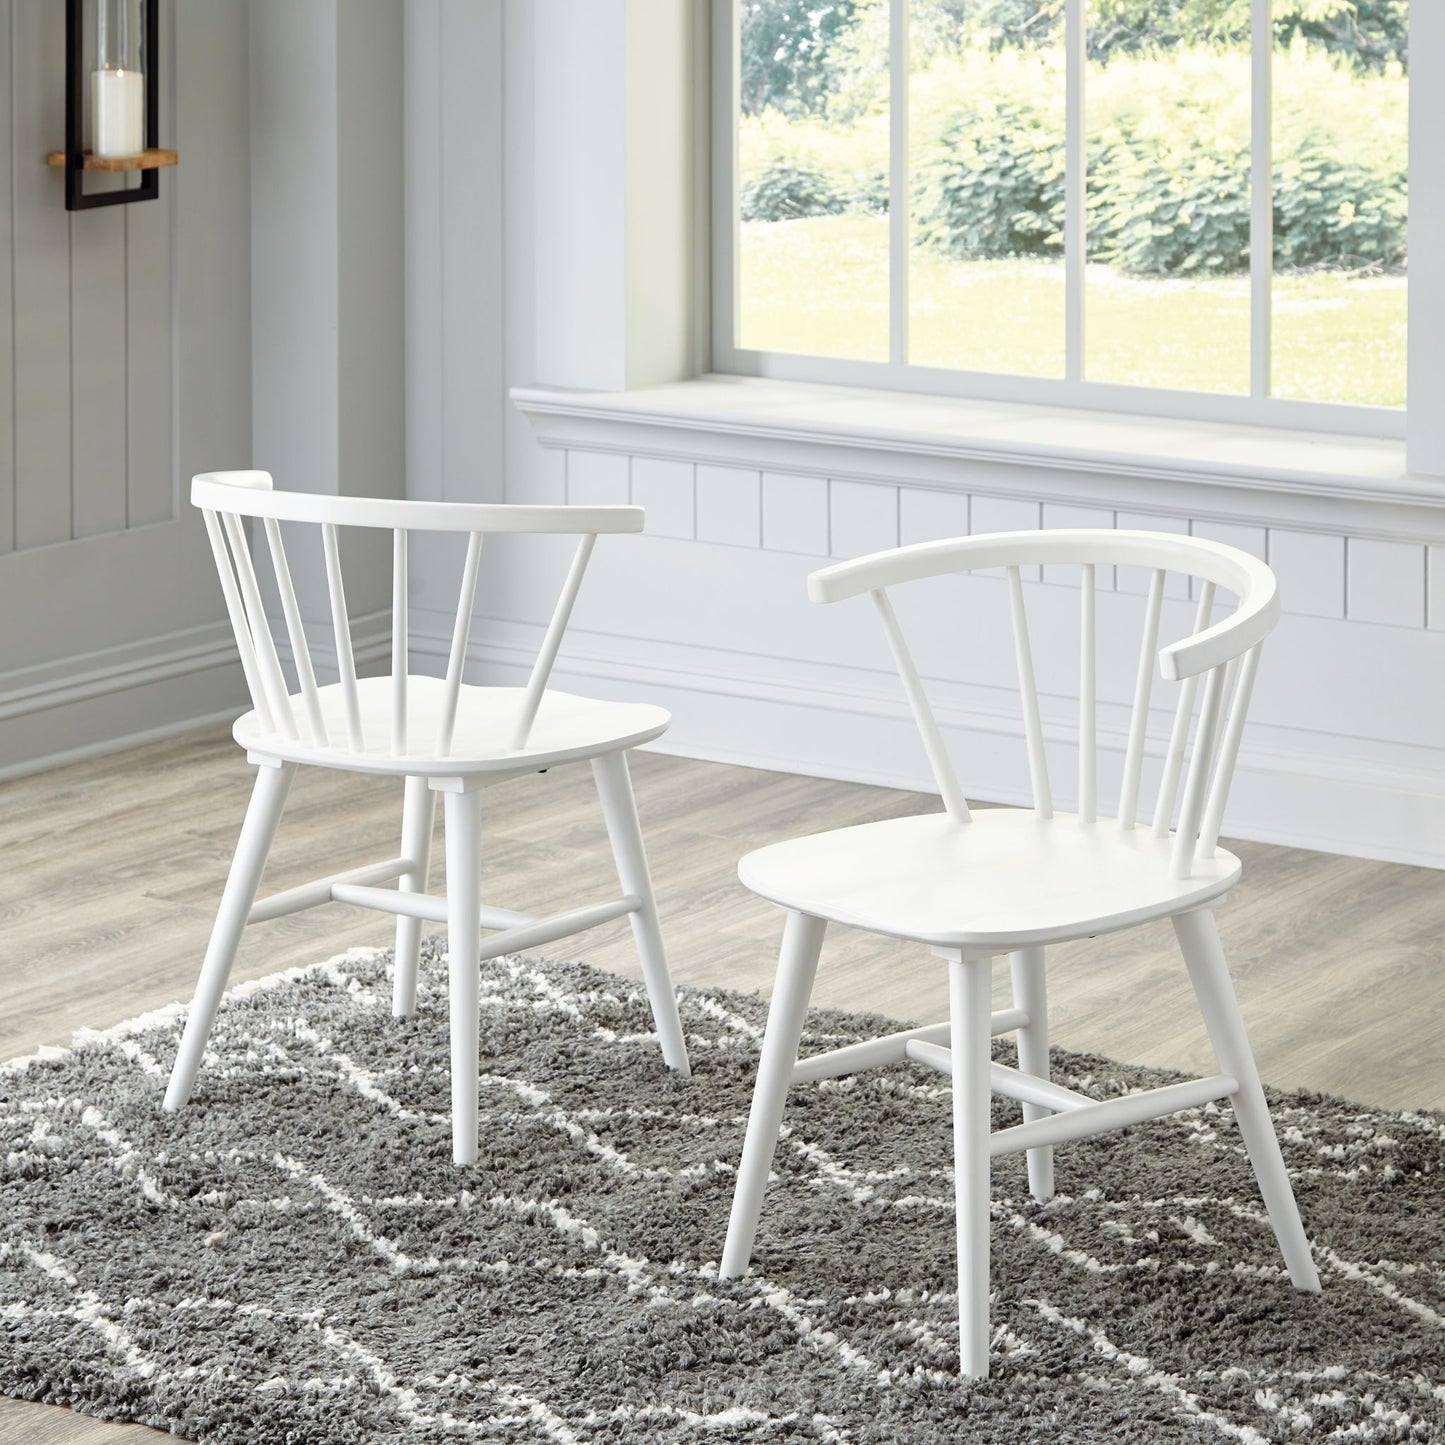 Grannen - White - 5 Pc. - Round Dining Table, 4 Side Chairs